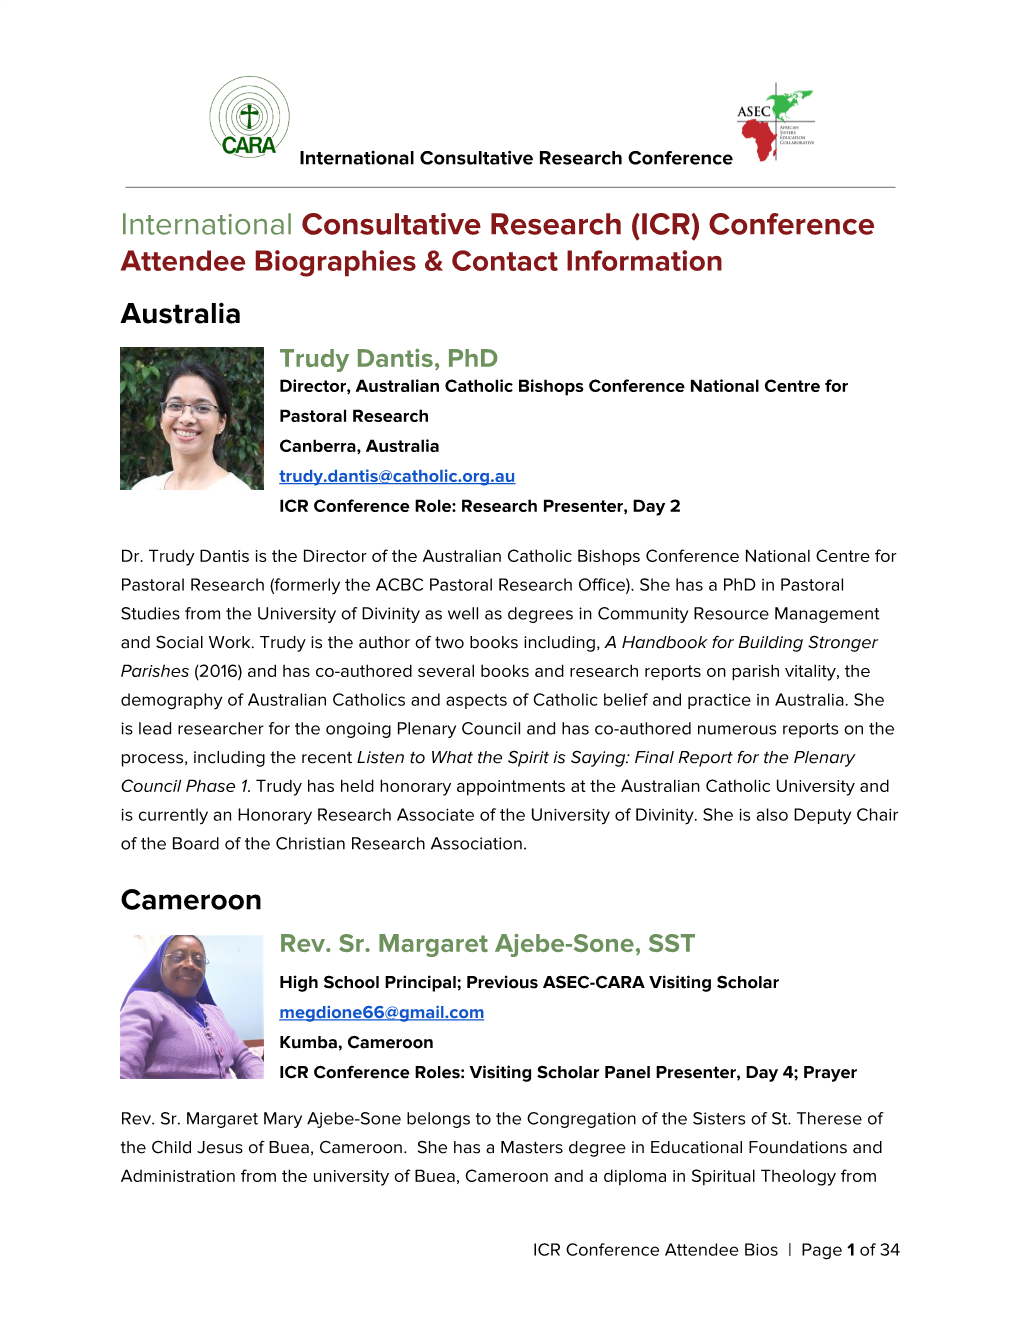 International ​Consultative Research (ICR) Conference